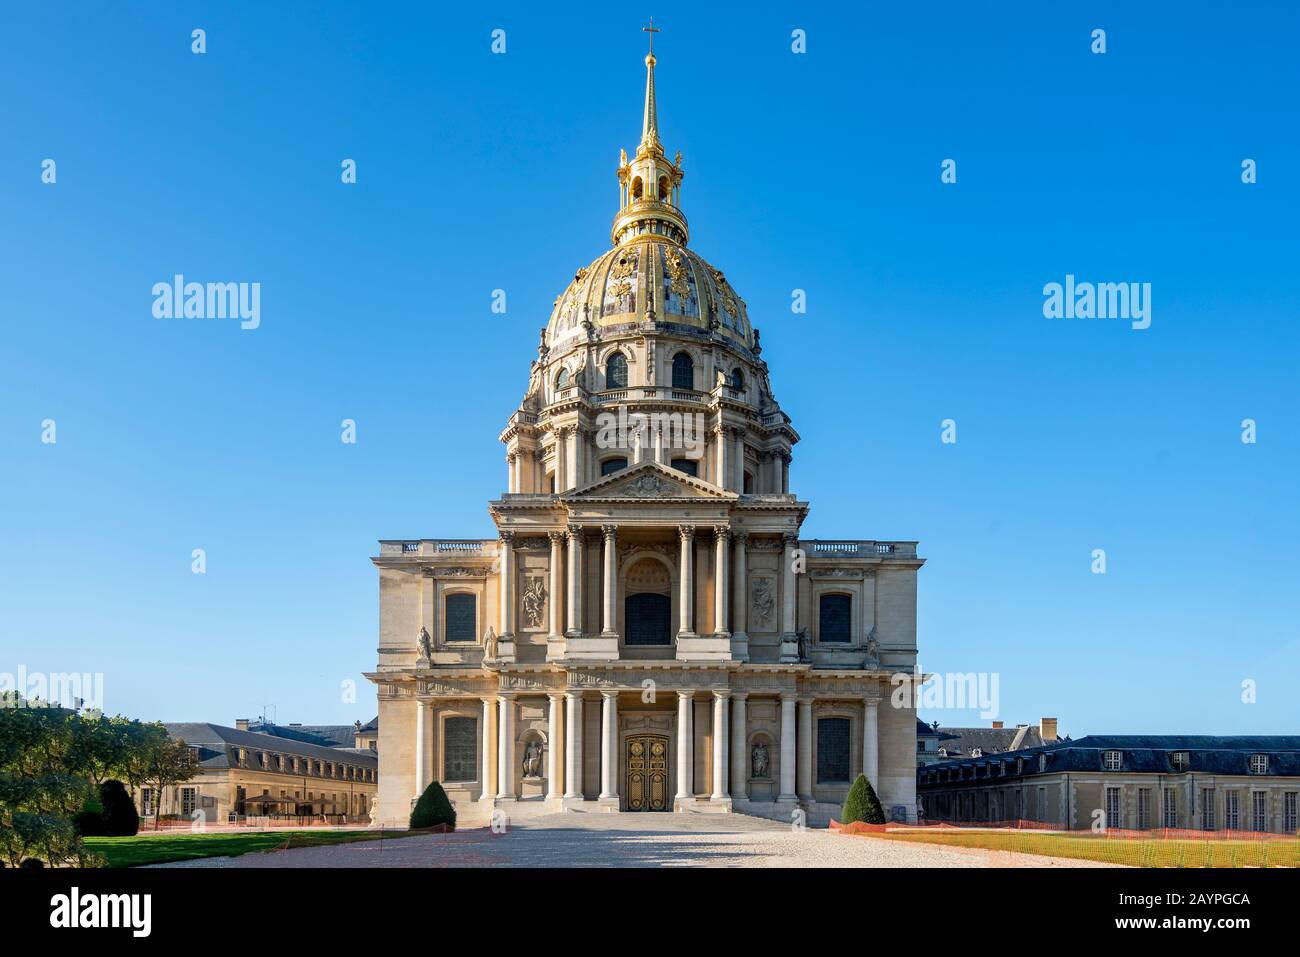 Building with dome and columns surrounded by green gardens and a blue sky Stock Photo